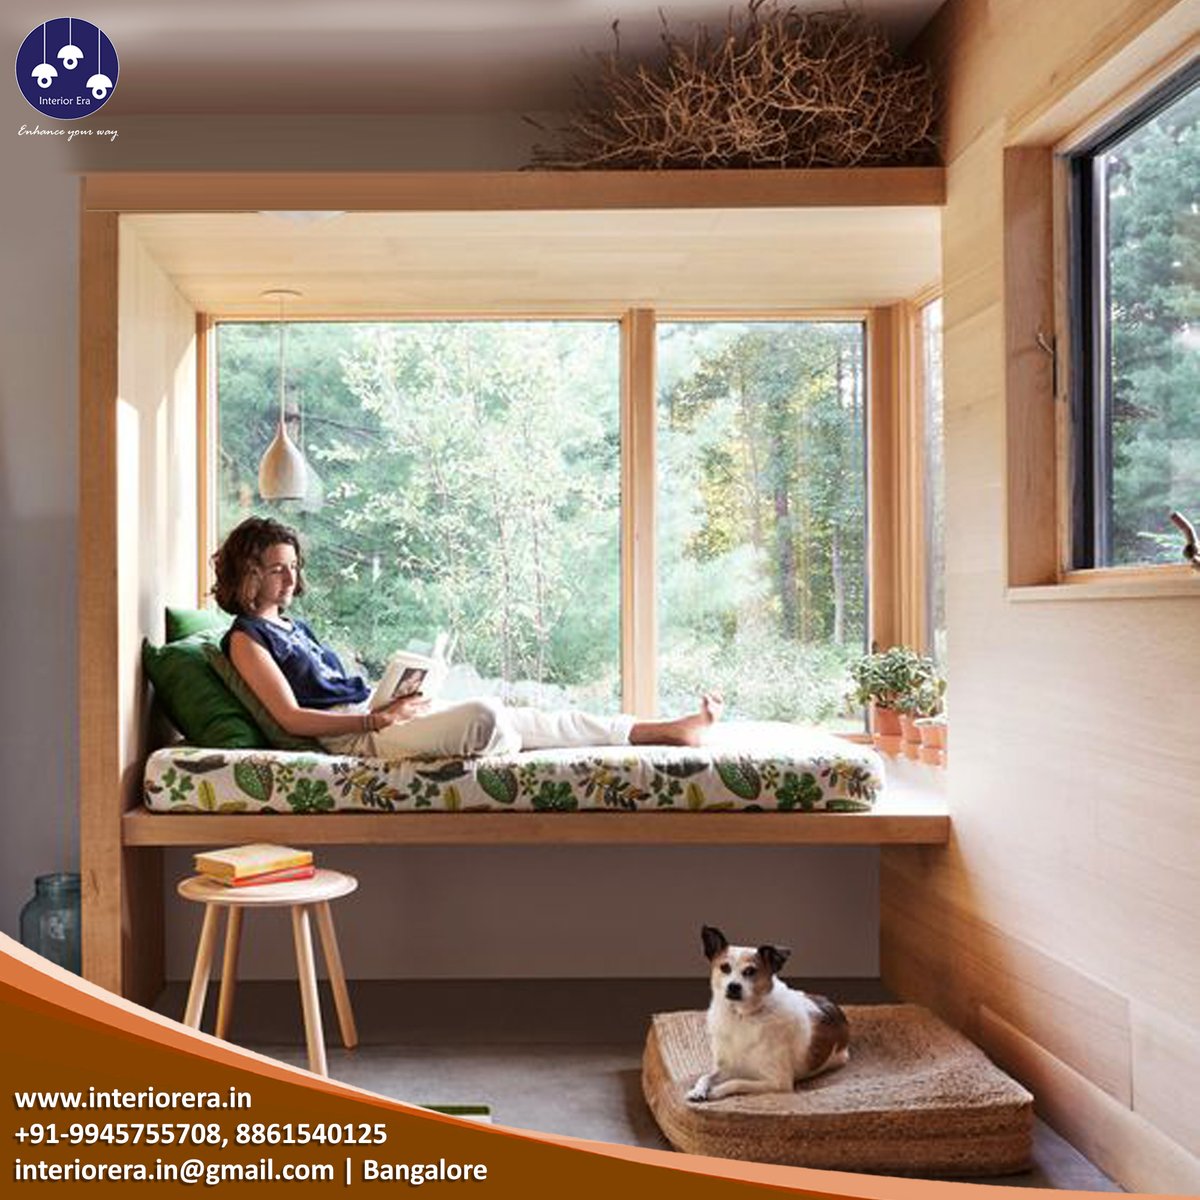 Window Seats Are An Extra Cozy Way To Relax And Unwind...!

#home #homeinterior #HomeInspiration #interior #interiors #interiordecor  #windows #windowseat #windowseatings #interiorsolutions #interiorworks #bestinteriors #goodinteriordesign #electroniccity #bangalore